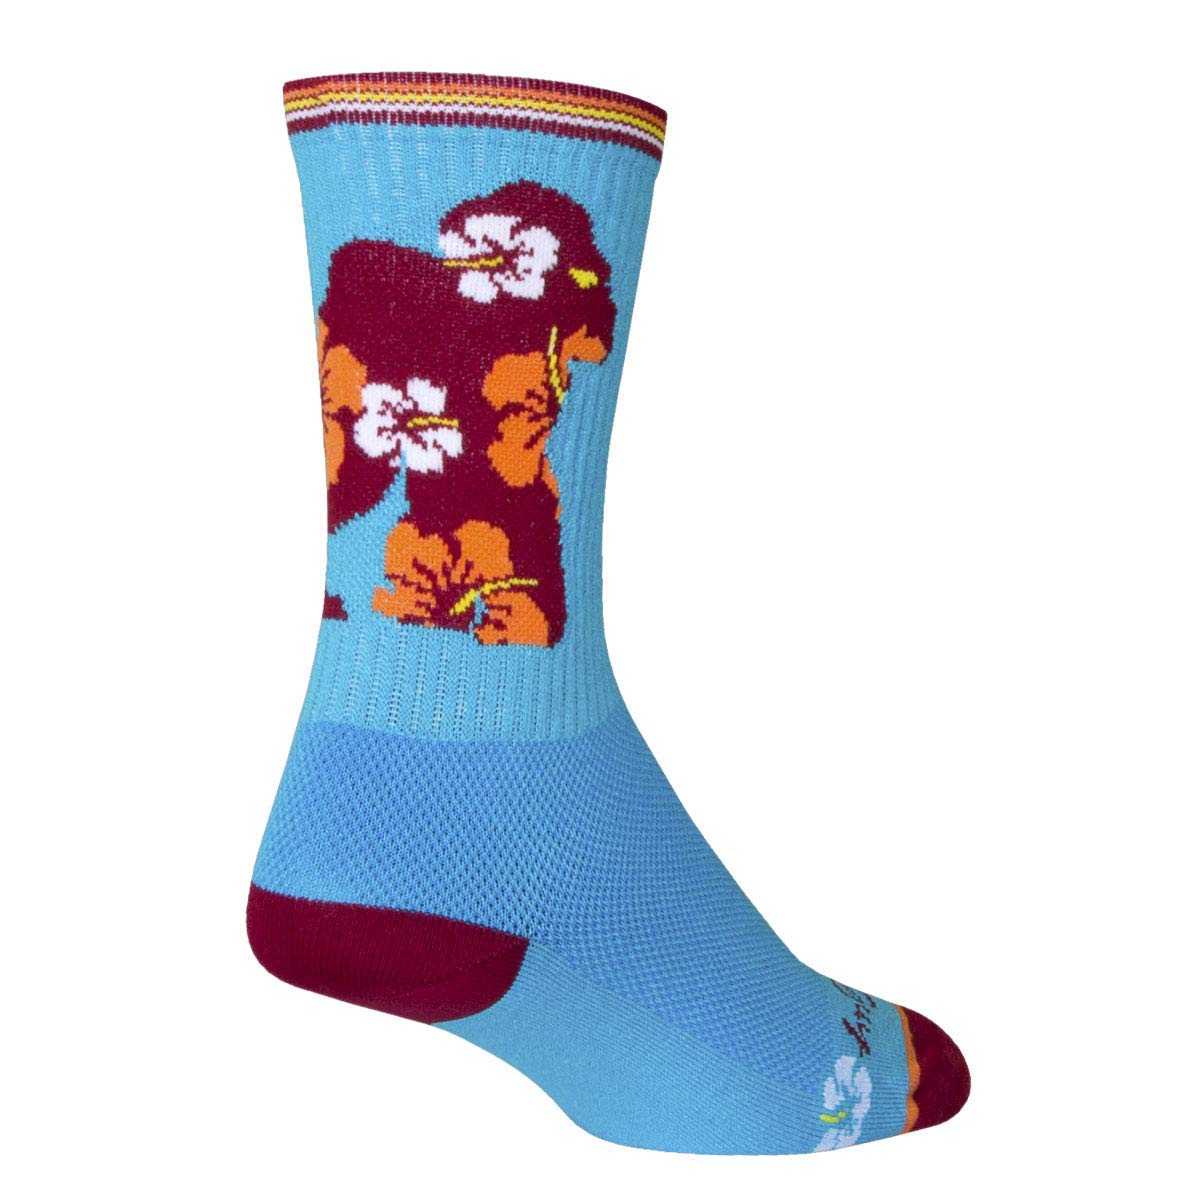 Socks - Sockguy - 6" Crew Lei'd S/M Cycling/Running - image 1 of 1